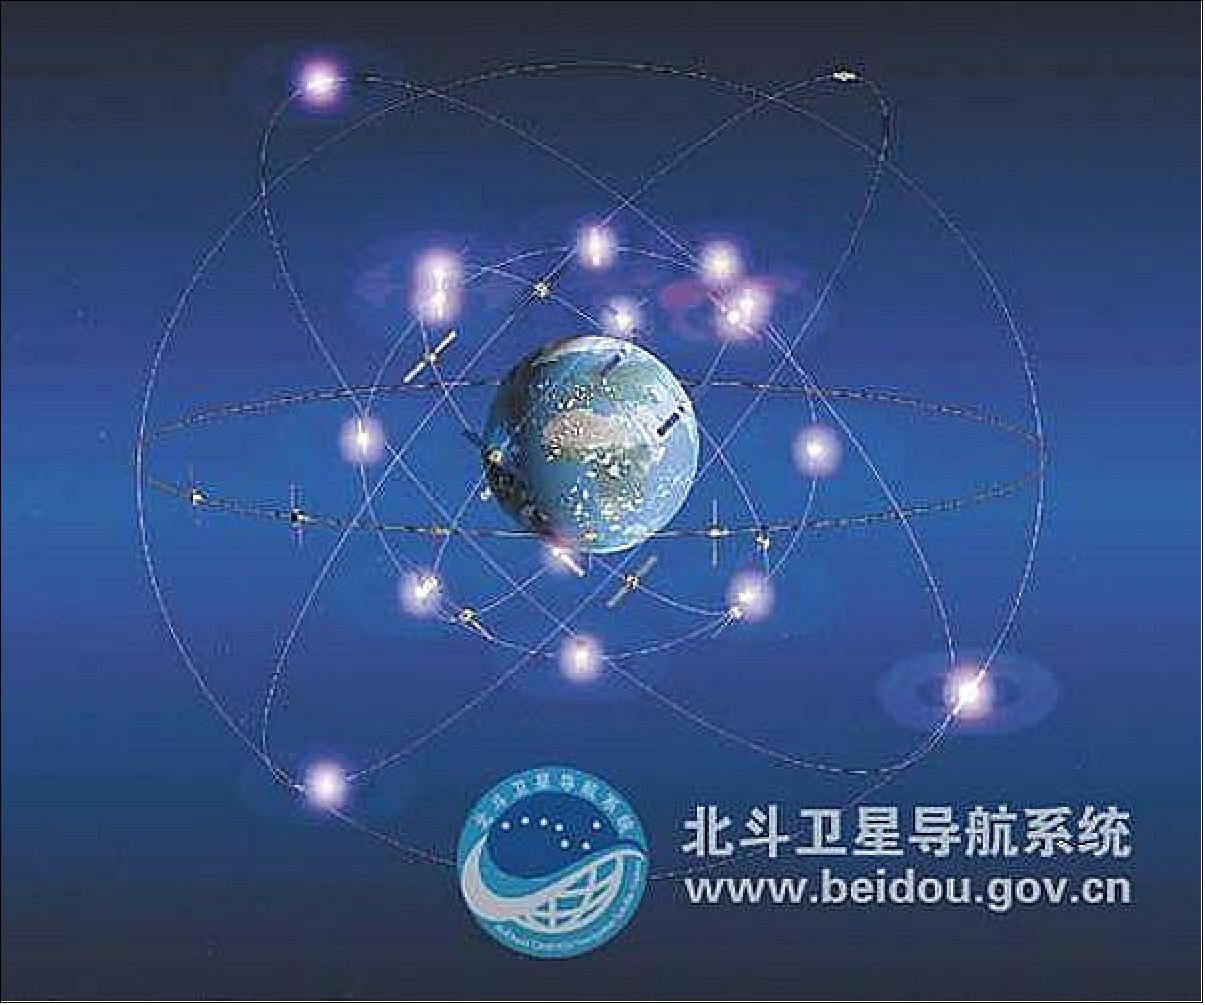 Figure 8: December 27, 2019 marked the one-year anniversary of China's BDS-3 system providing global services. China will finish the construction of the BDS-3, with another two satellites to be launched before June 2020 (image credit: Xinhua News Agency)